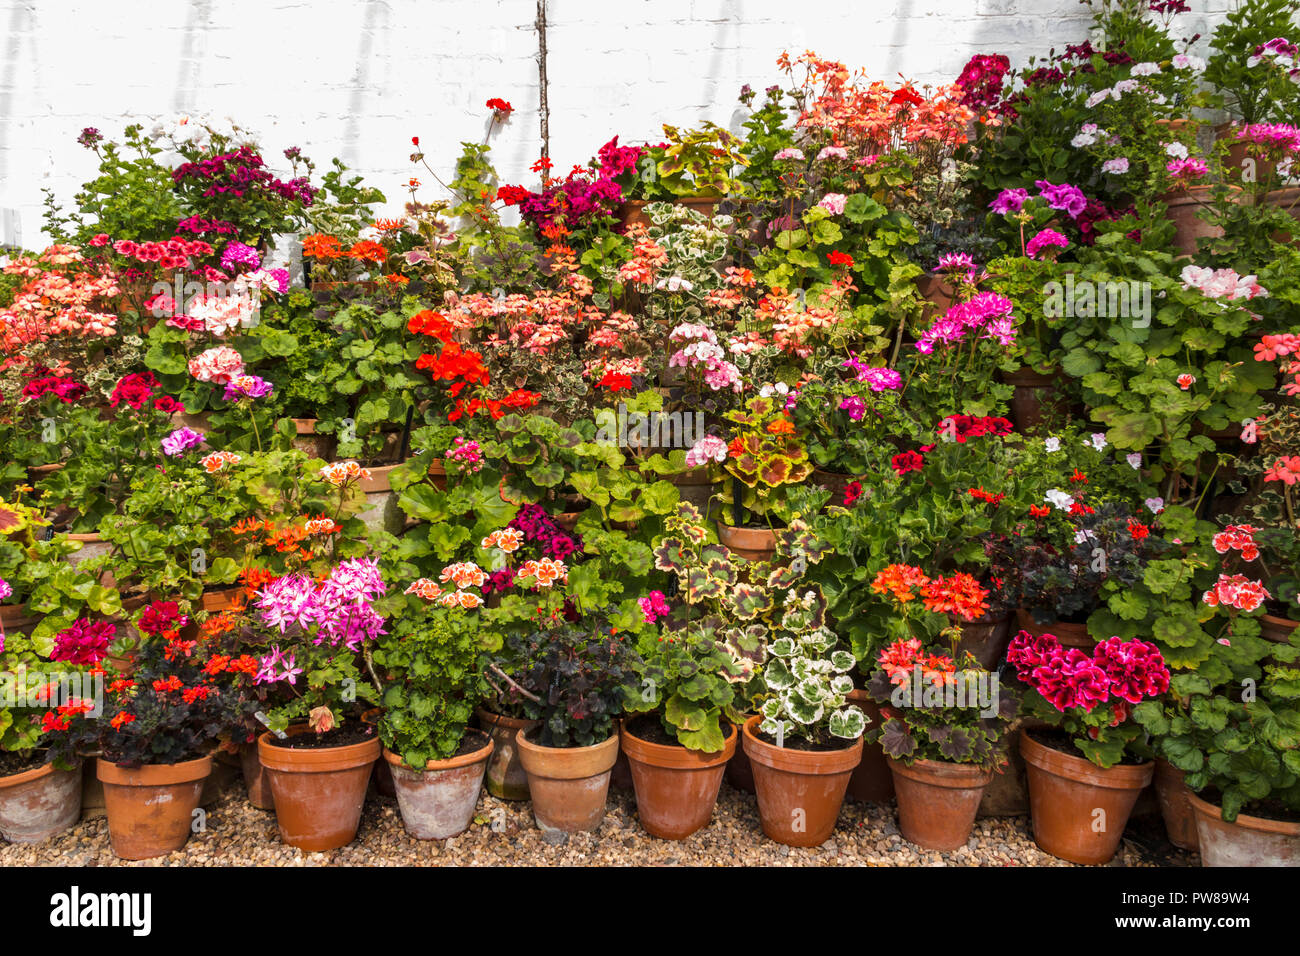 Tiered display of pelargoniums / geraniums in terracotta pots in a greenhouse at Dyffryn Gardens, South Wales, UK Stock Photo